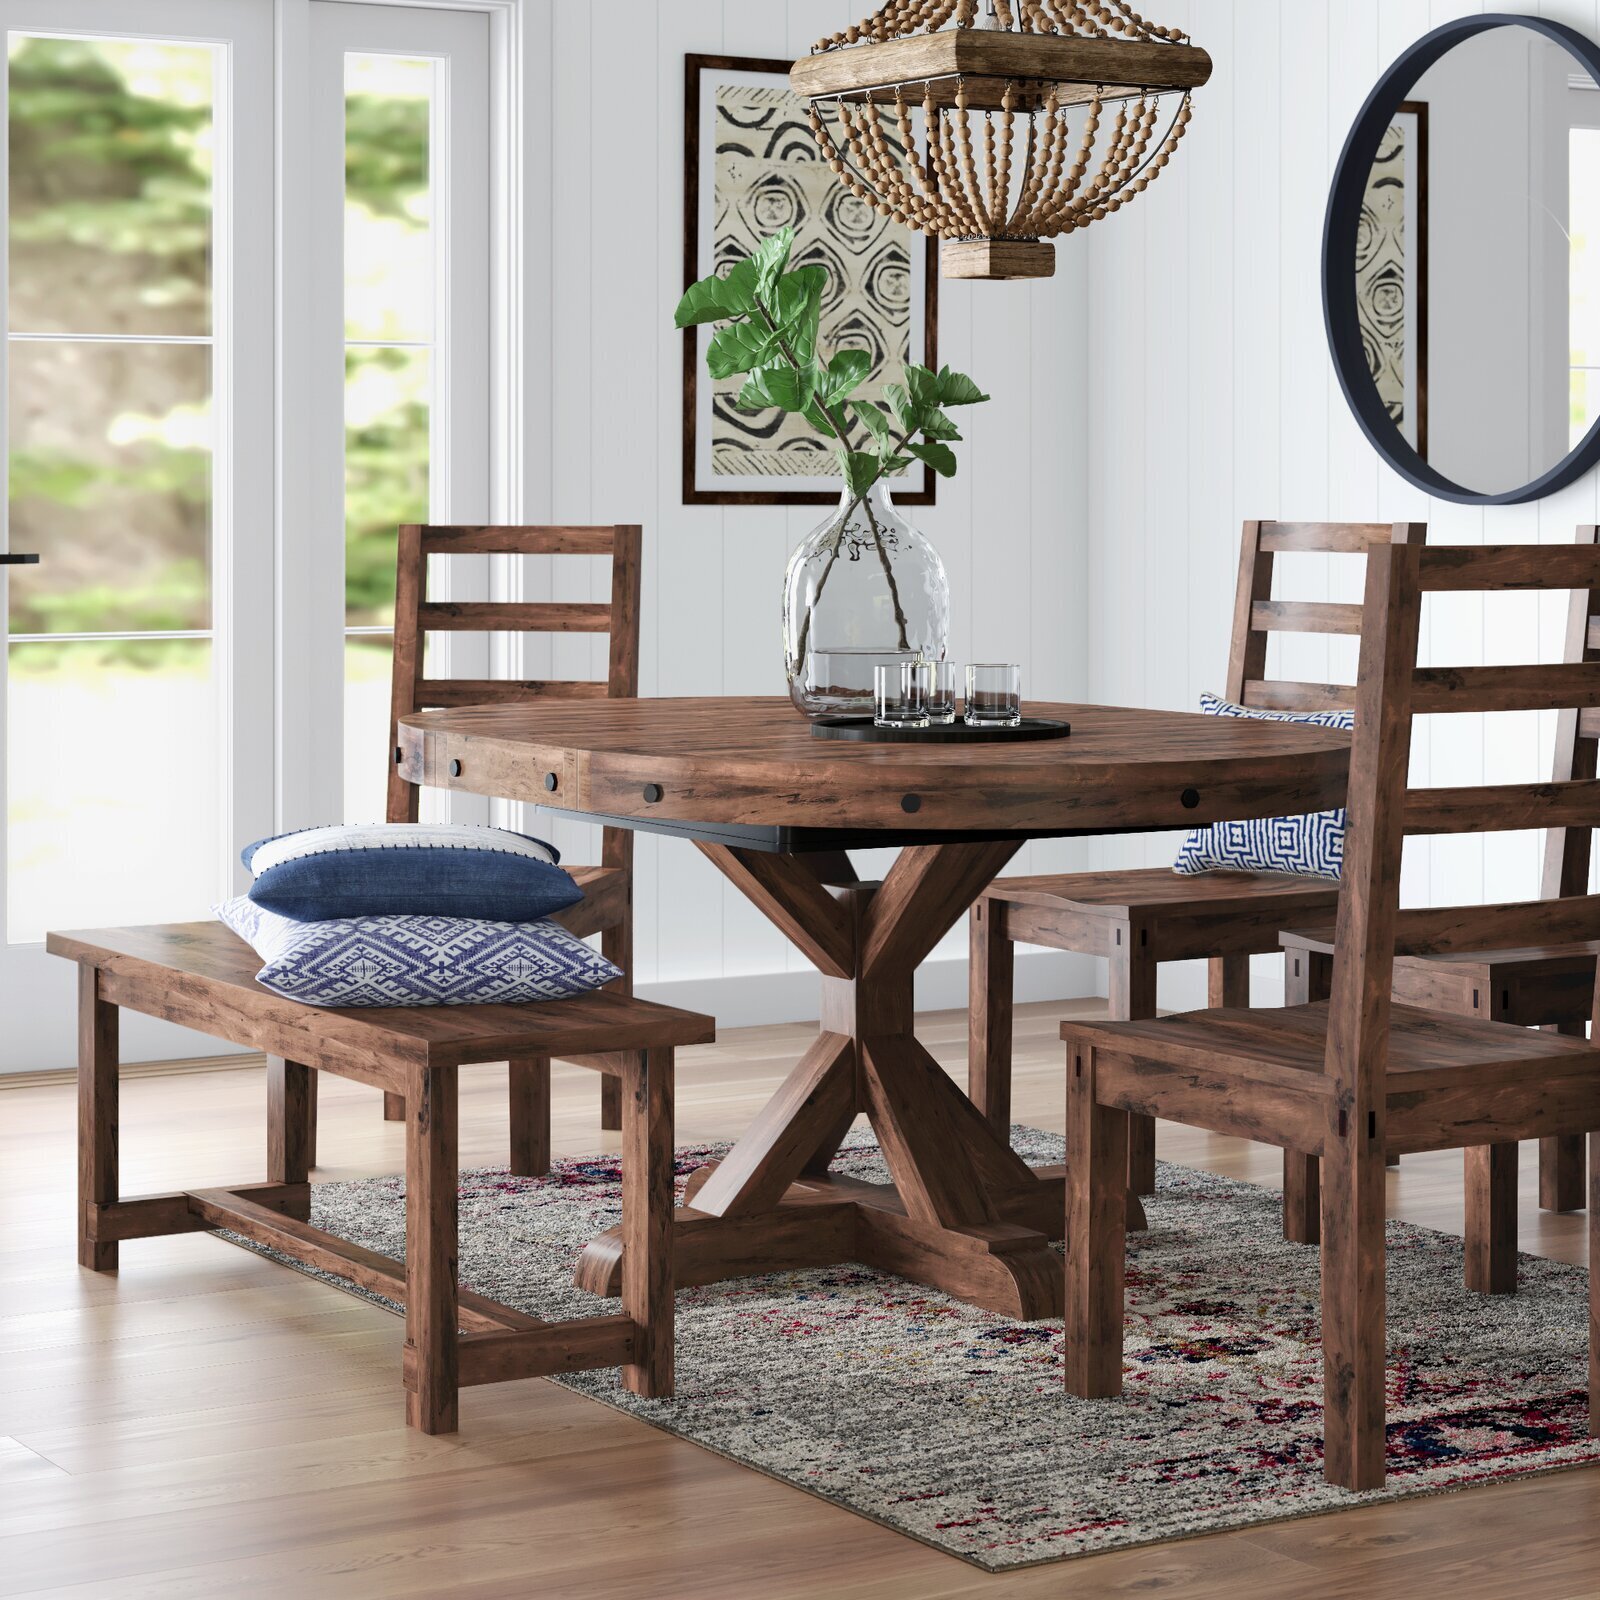 Solid wood dining table set with leaf